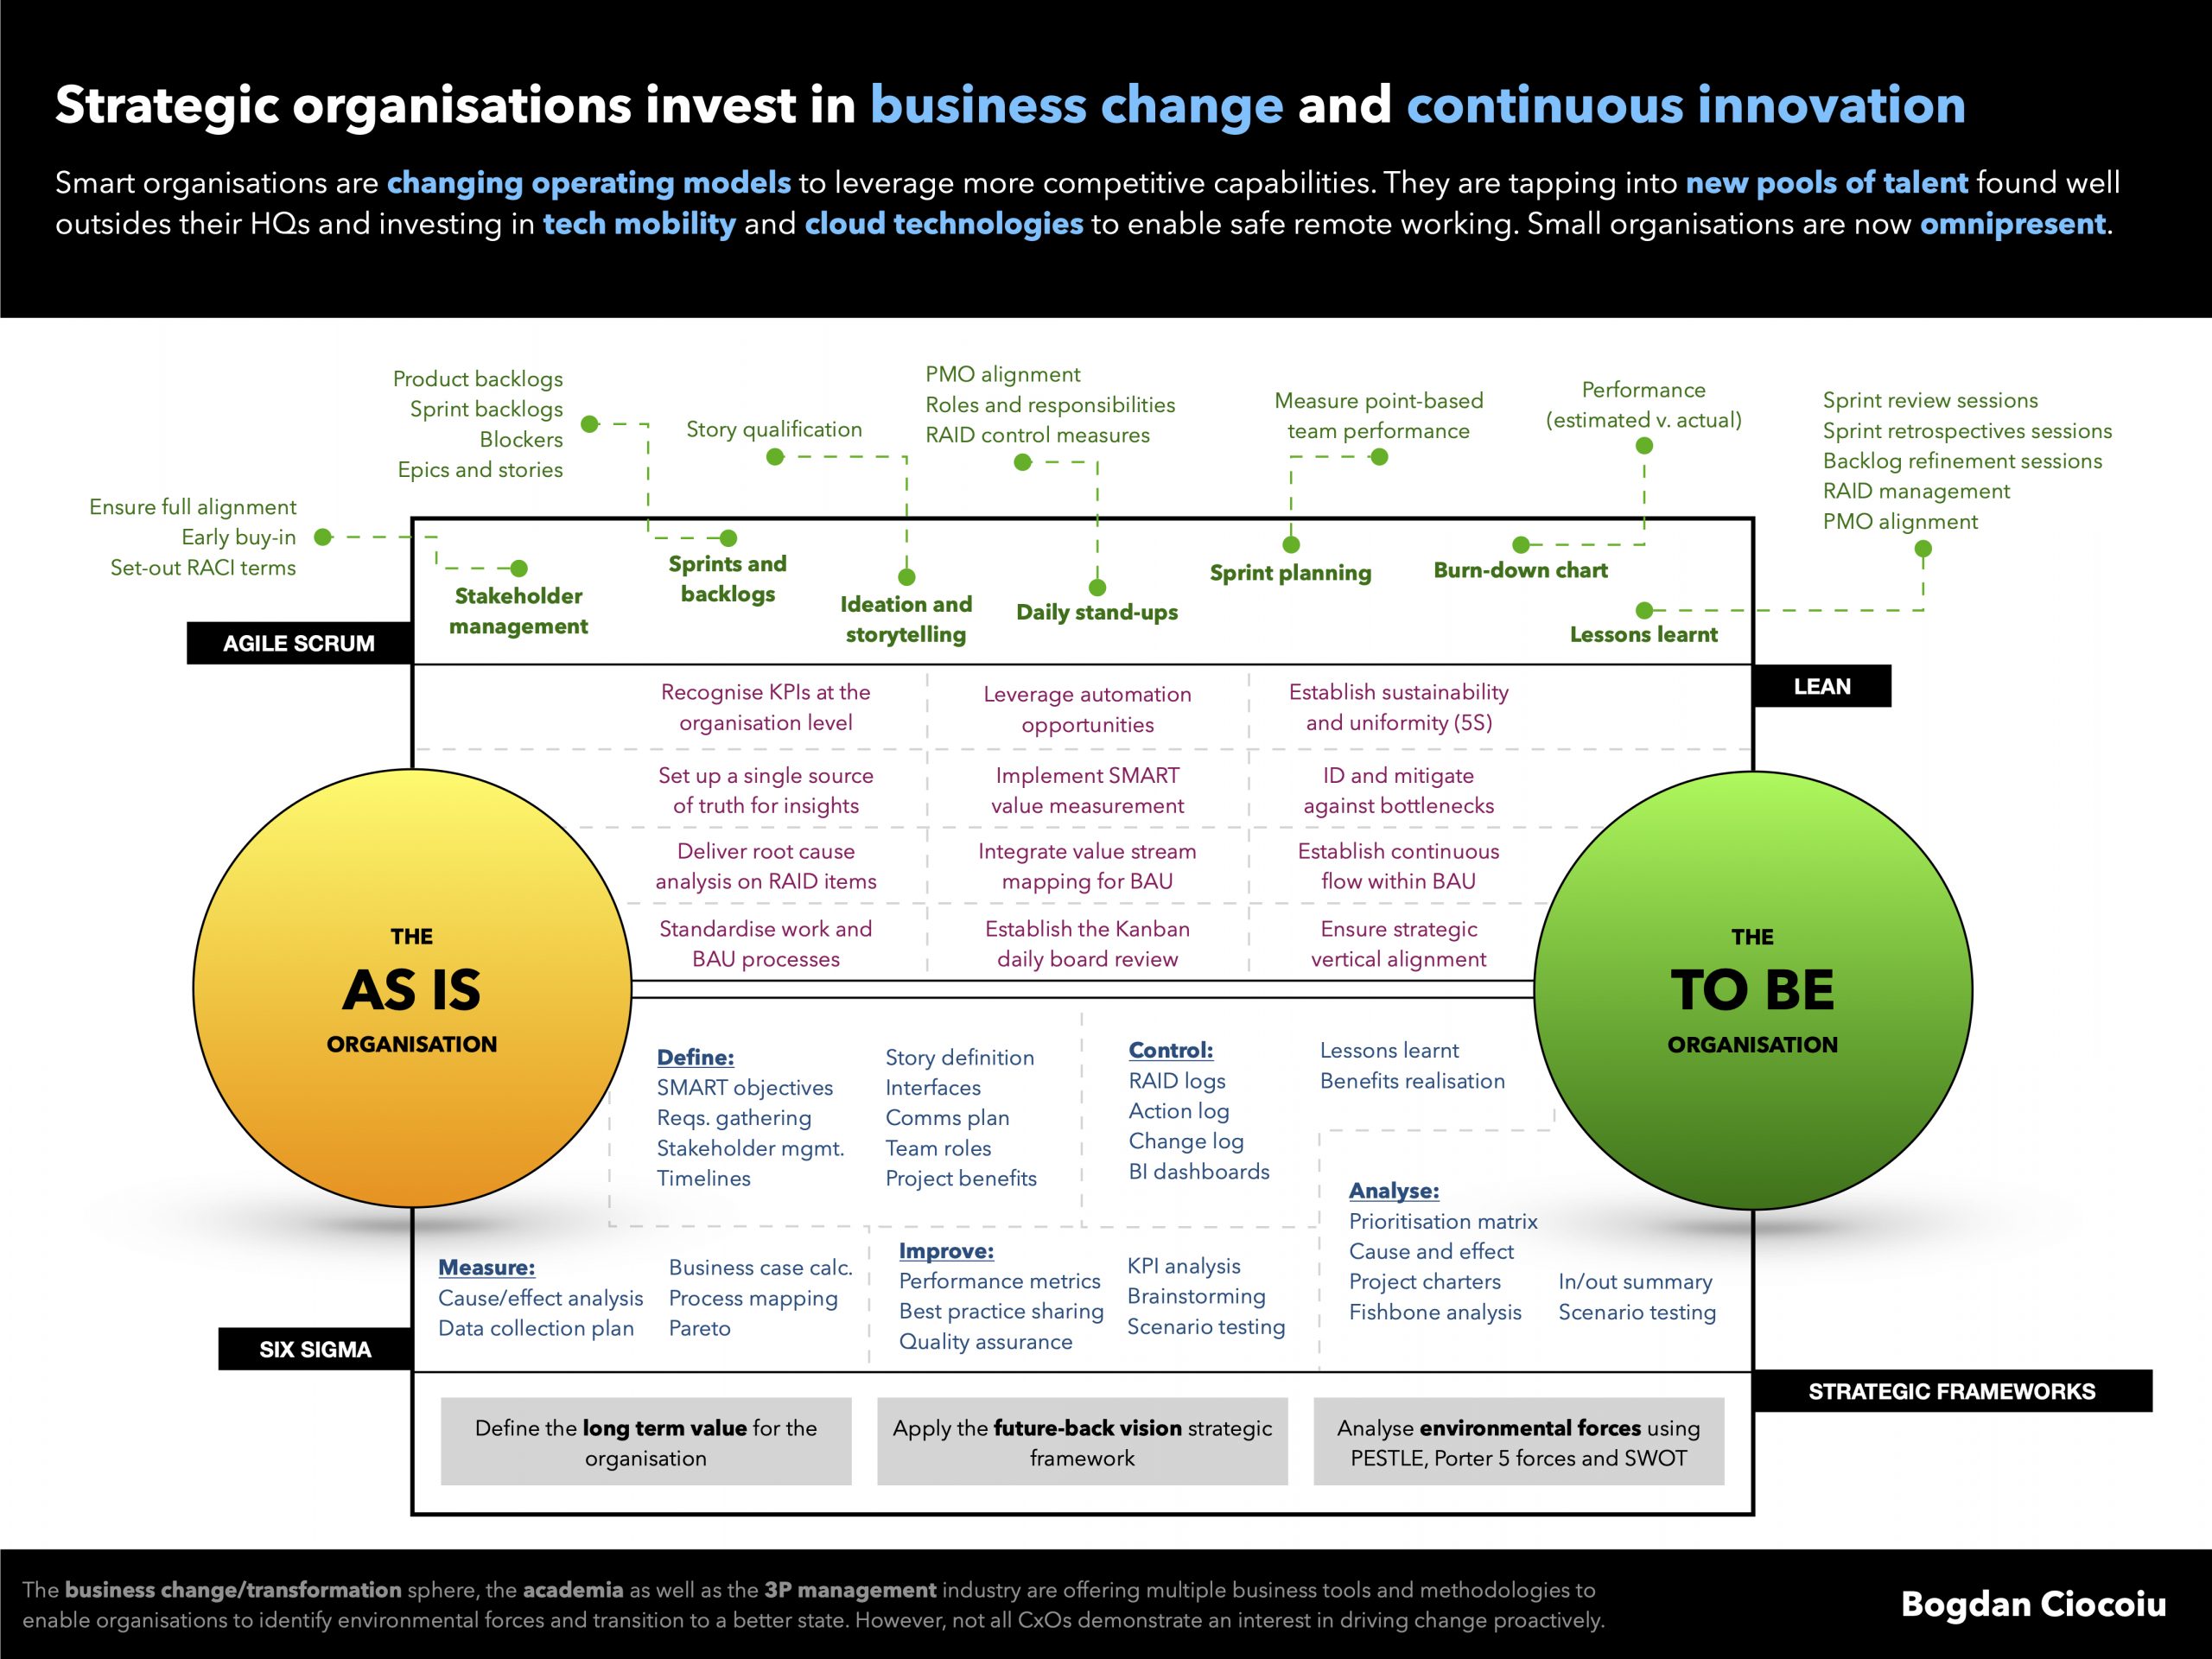 Strategic organisations invest in business change and continuous innovation - Bogdan Ciocoiu